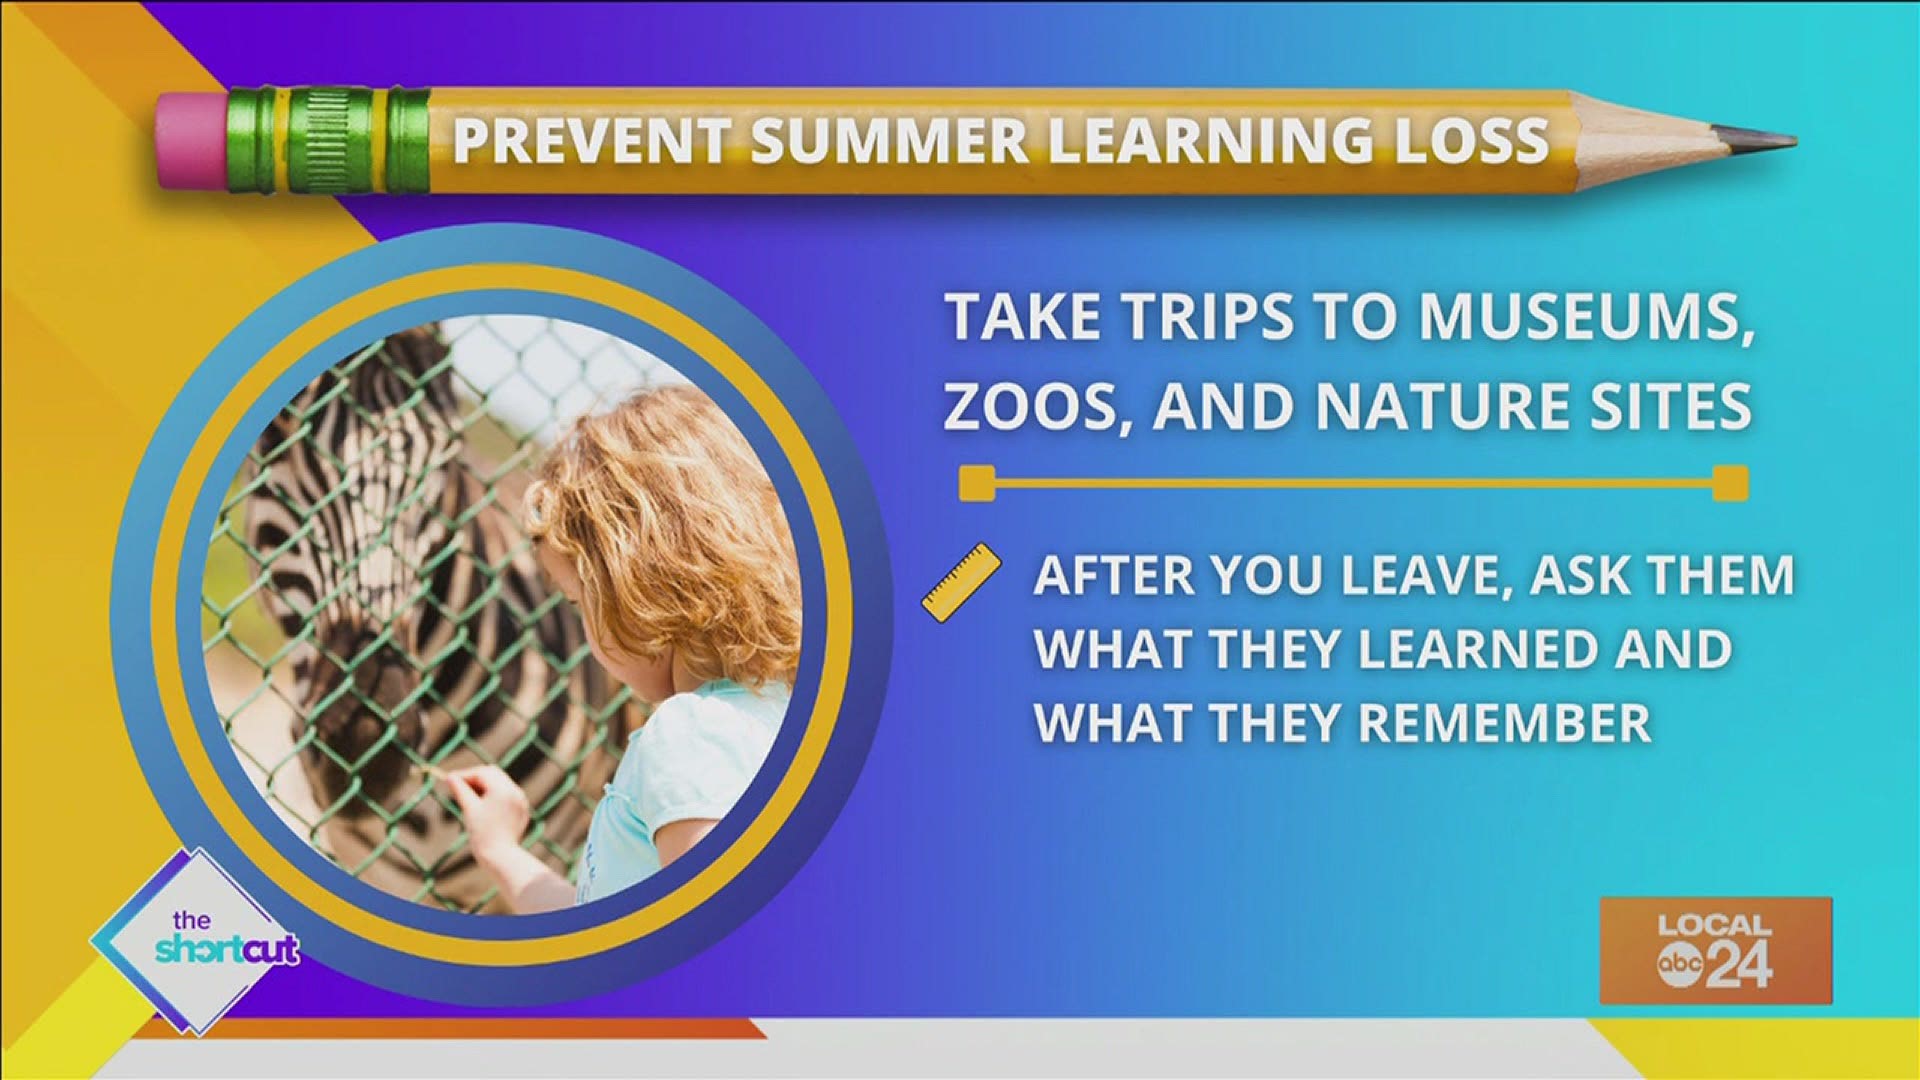 Who says that learning can't be fun? Join Sydney Neely for tips and tricks on how to prevent summer learning loss in kids. Only on "The Shortcut!"